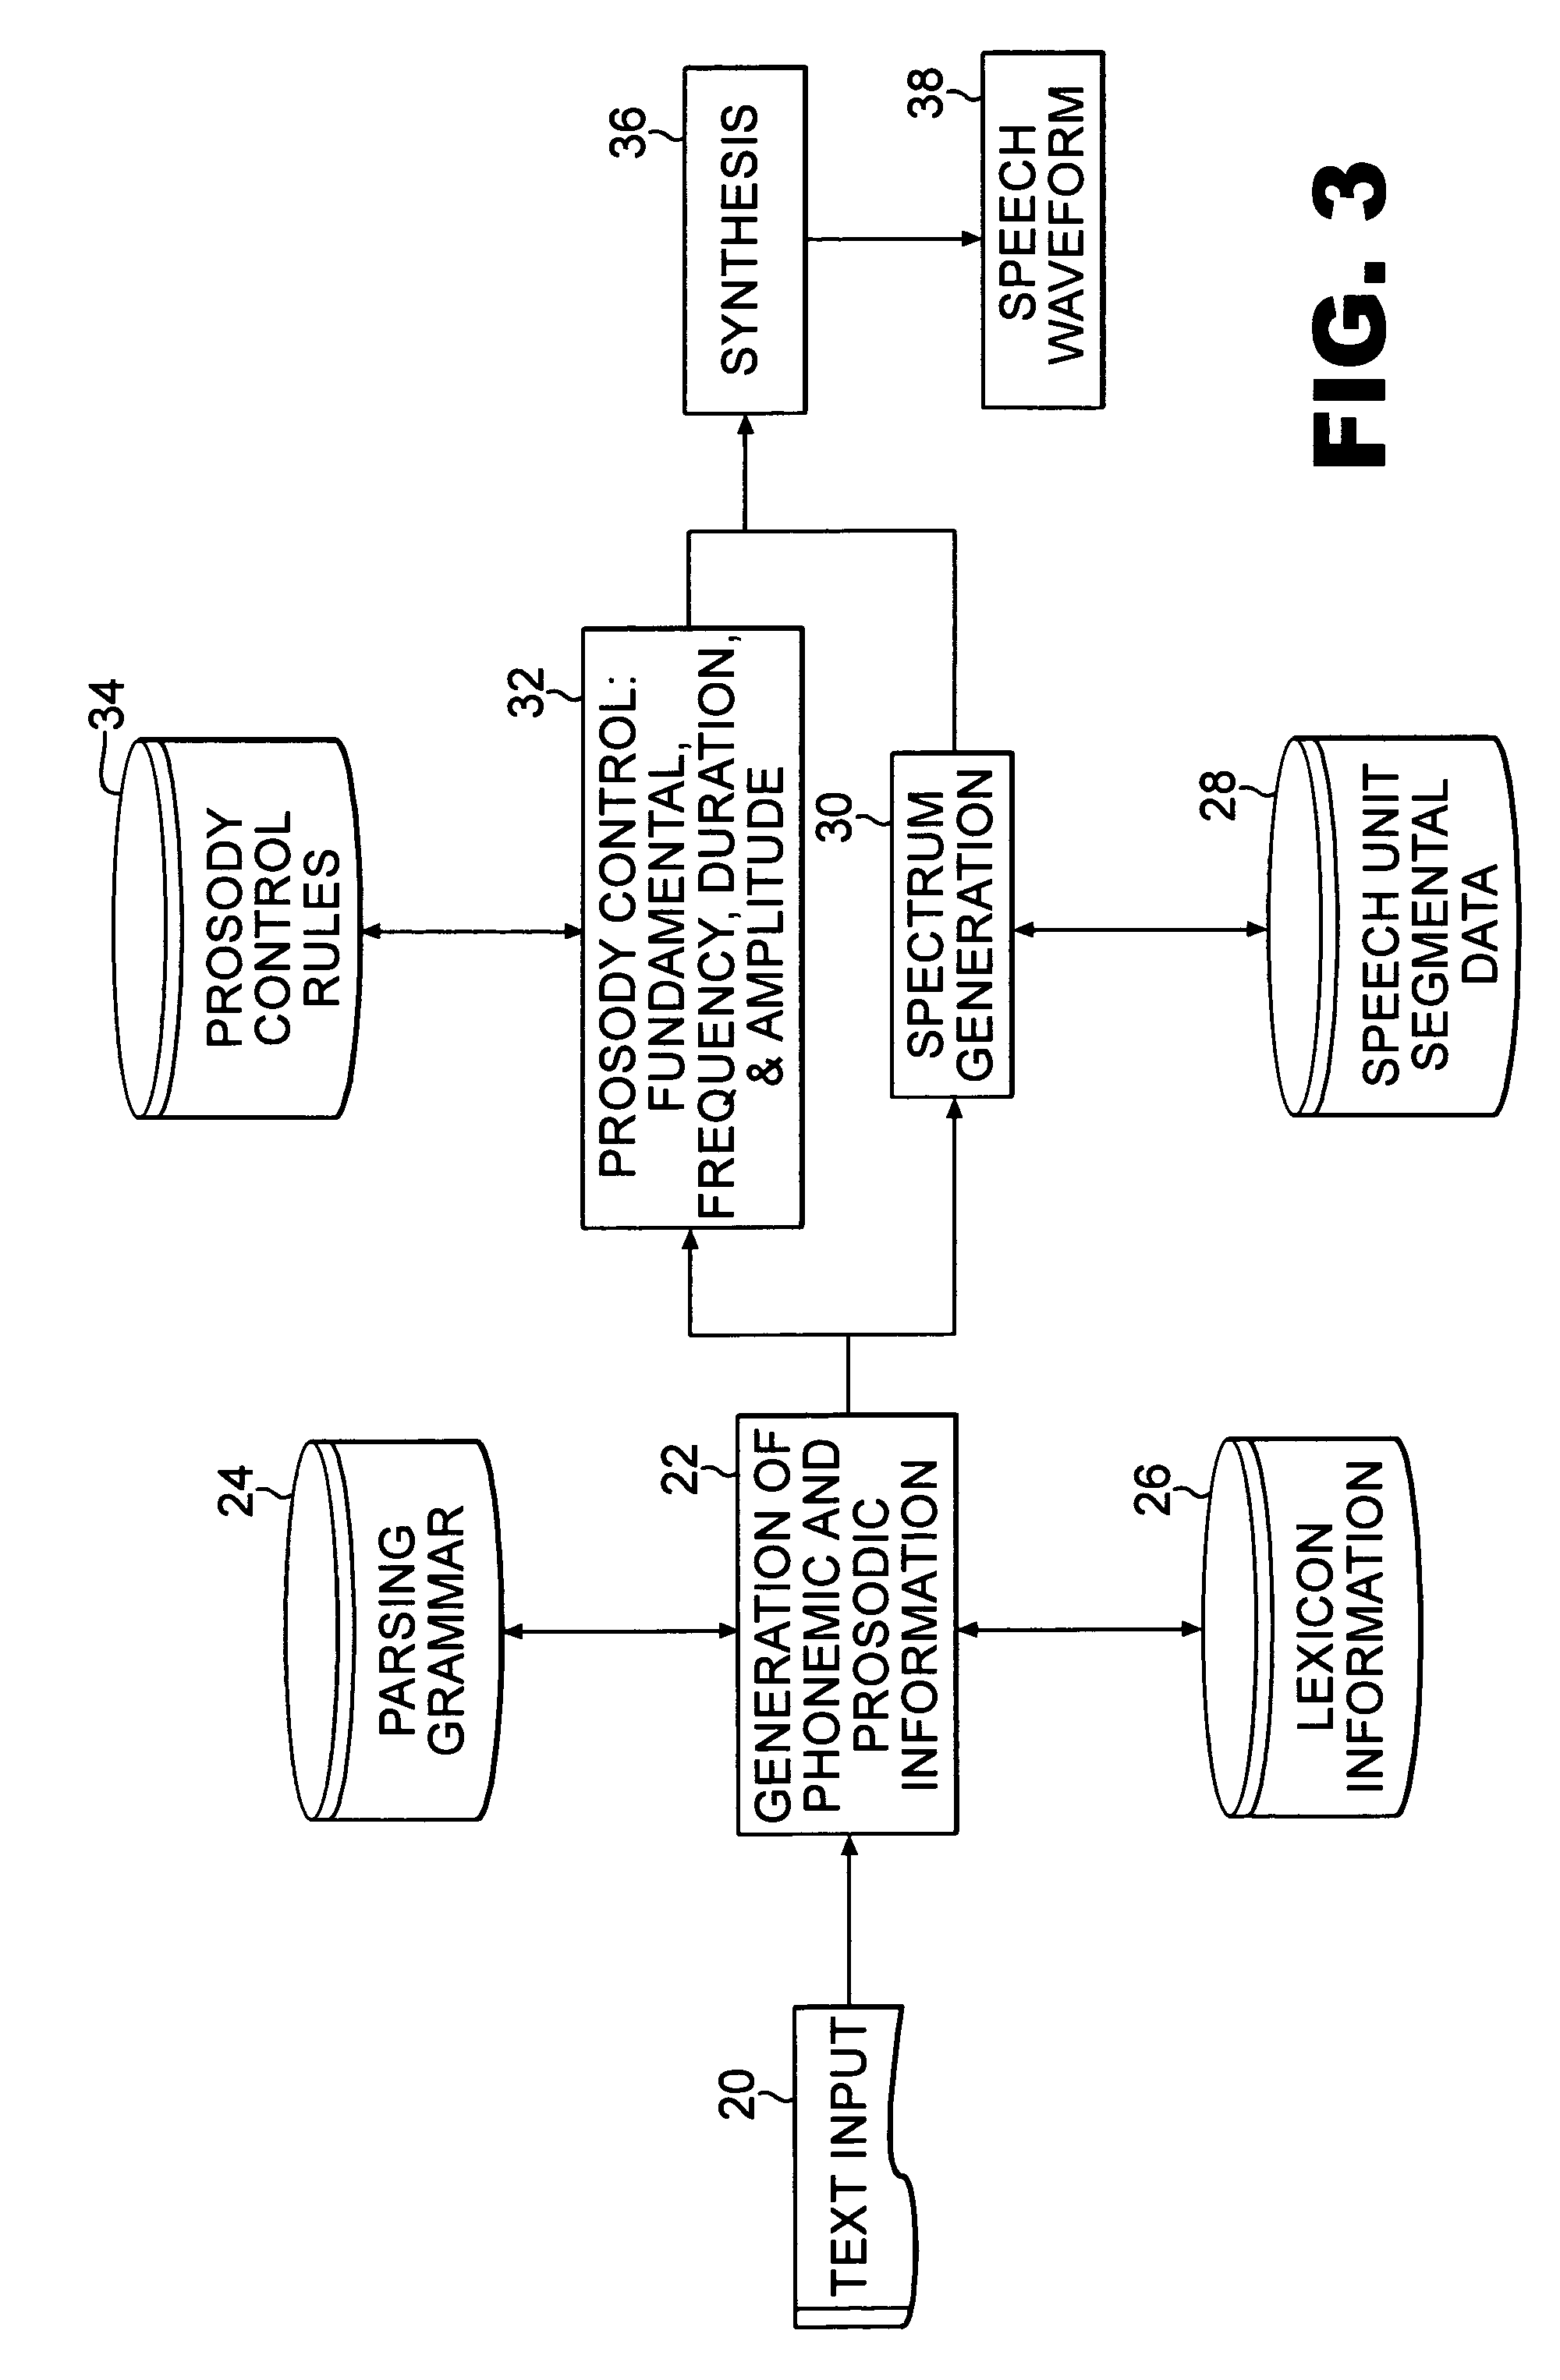 Method for guiding text-to-speech output timing using speech recognition markers